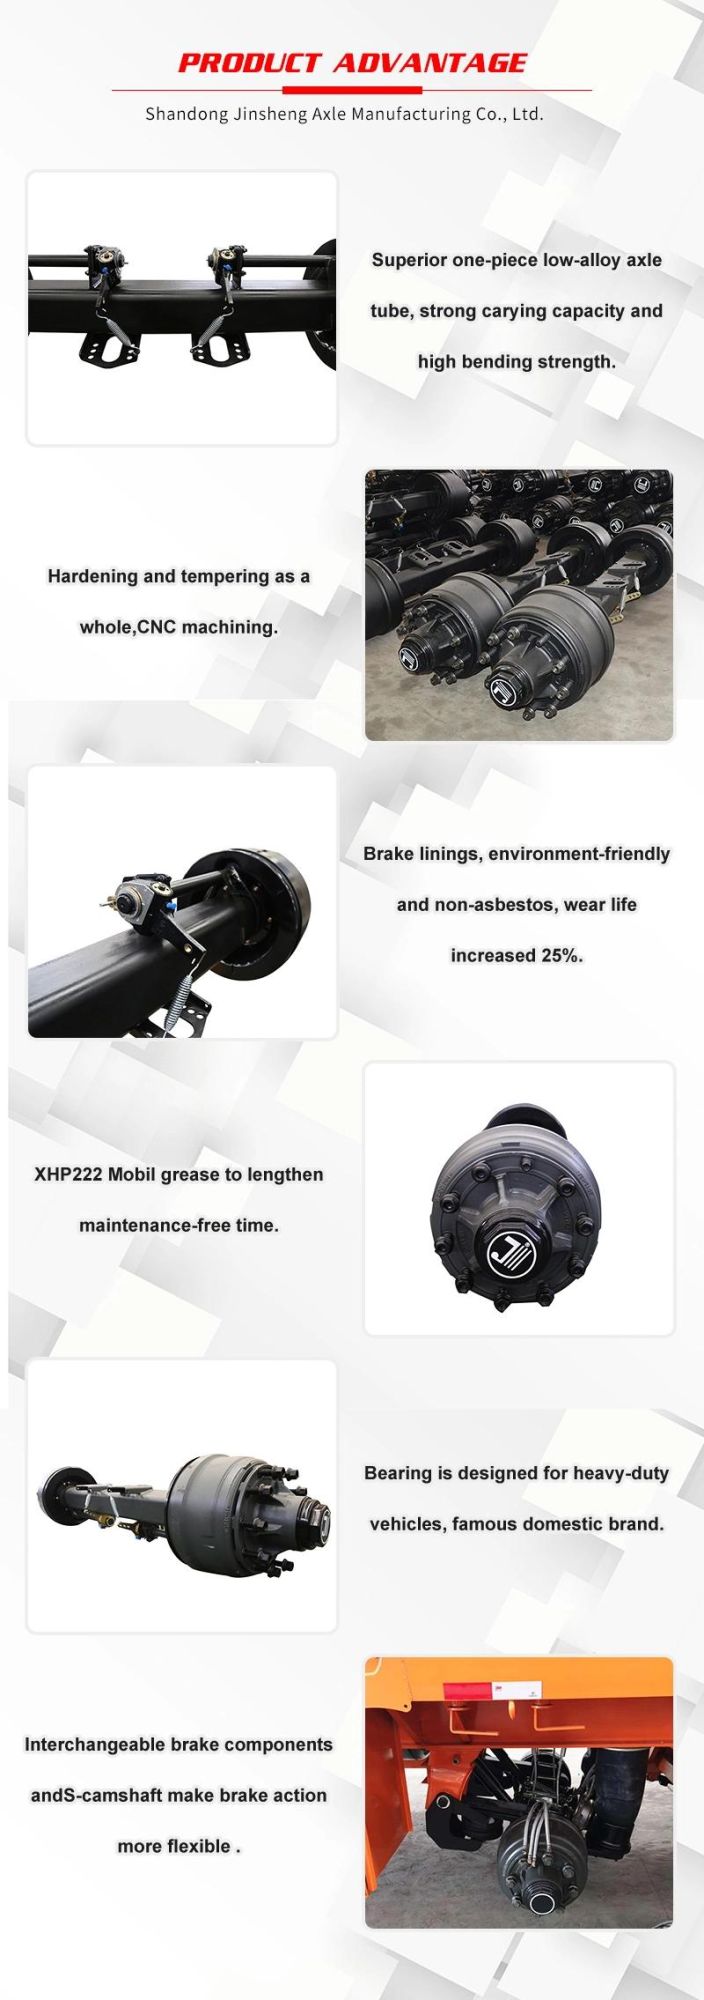 Trailer Part 13t 16t American Type Axle Outboard Axle Rear Axle Truck Axle for Semi Trailer Truck Parts and Spare Parts